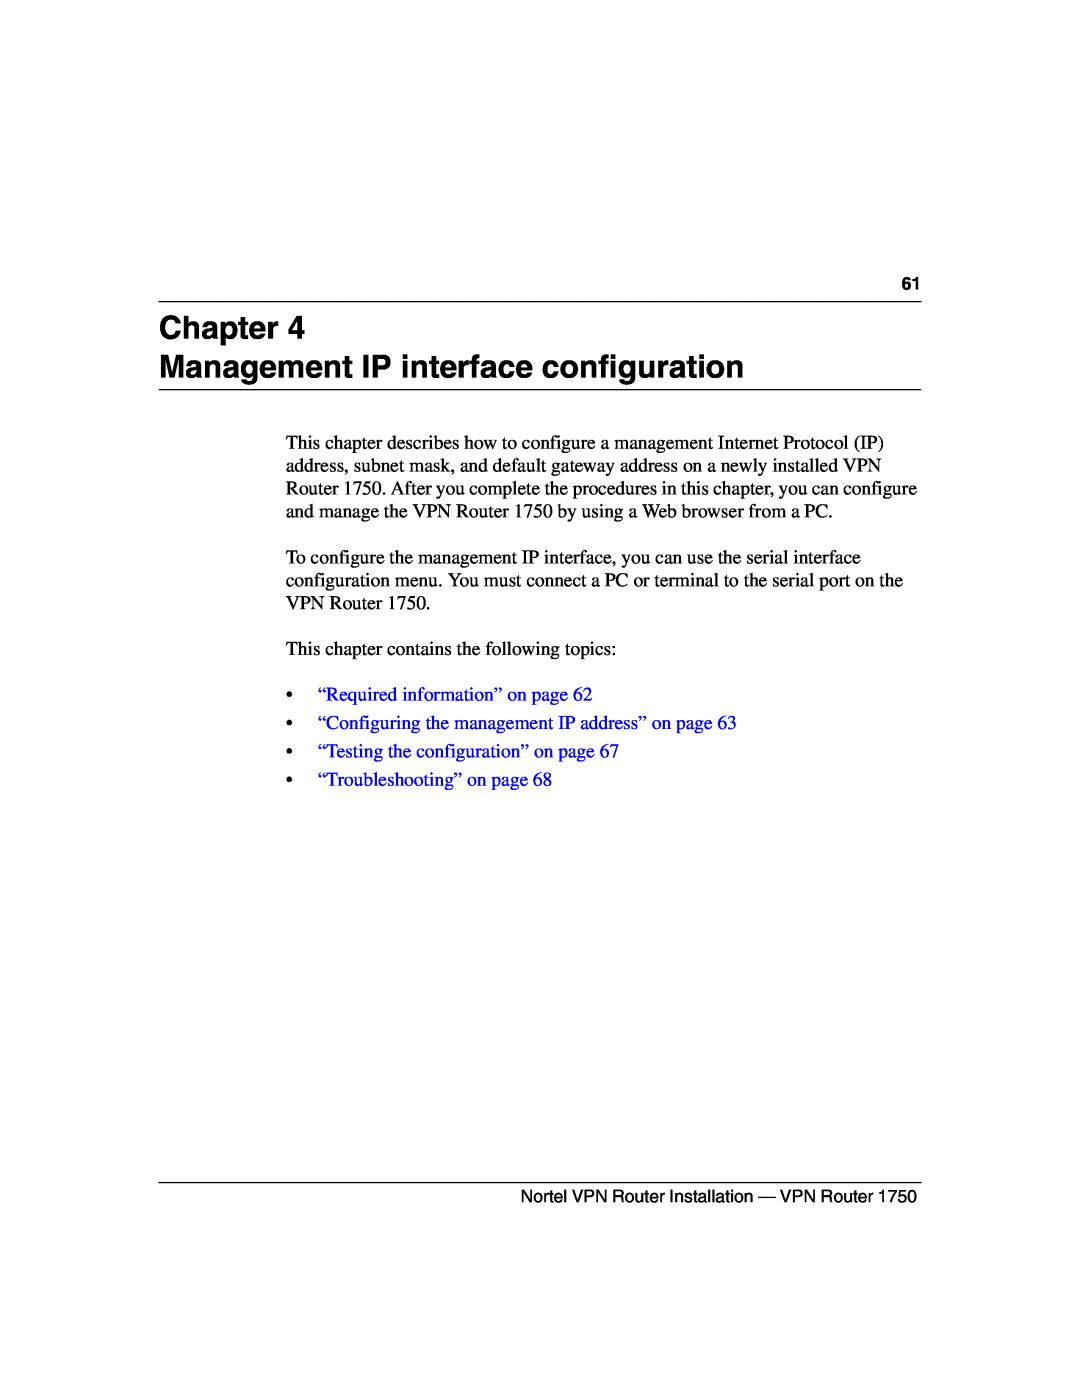 Nortel Networks 1750 manual Chapter Management IP interface configuration, “Required information” on page 